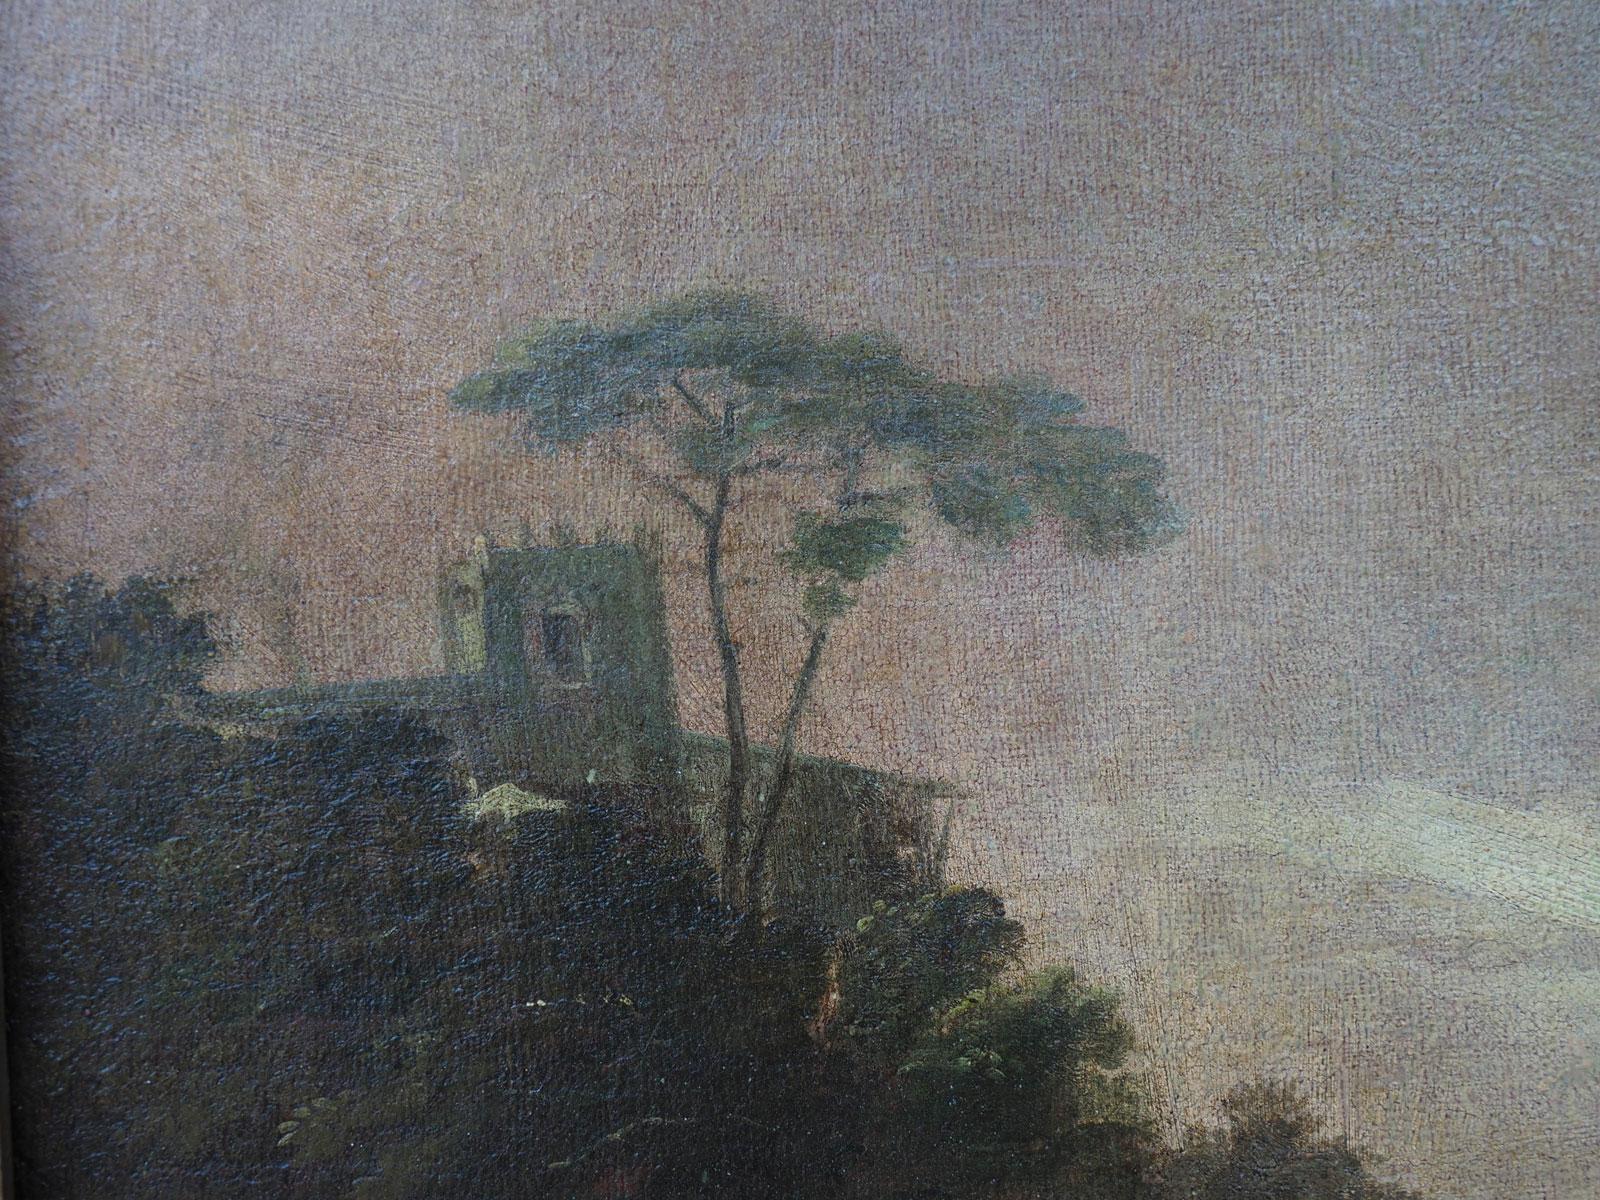 Landscape at dusk with characters by Marco Ricci’s follower – XVIII century
This oil-on-canvas painting portrays a typical Venetian countryside landscape at dusk. 
The chromatic choice, namely the predominance of the brown palette, together with